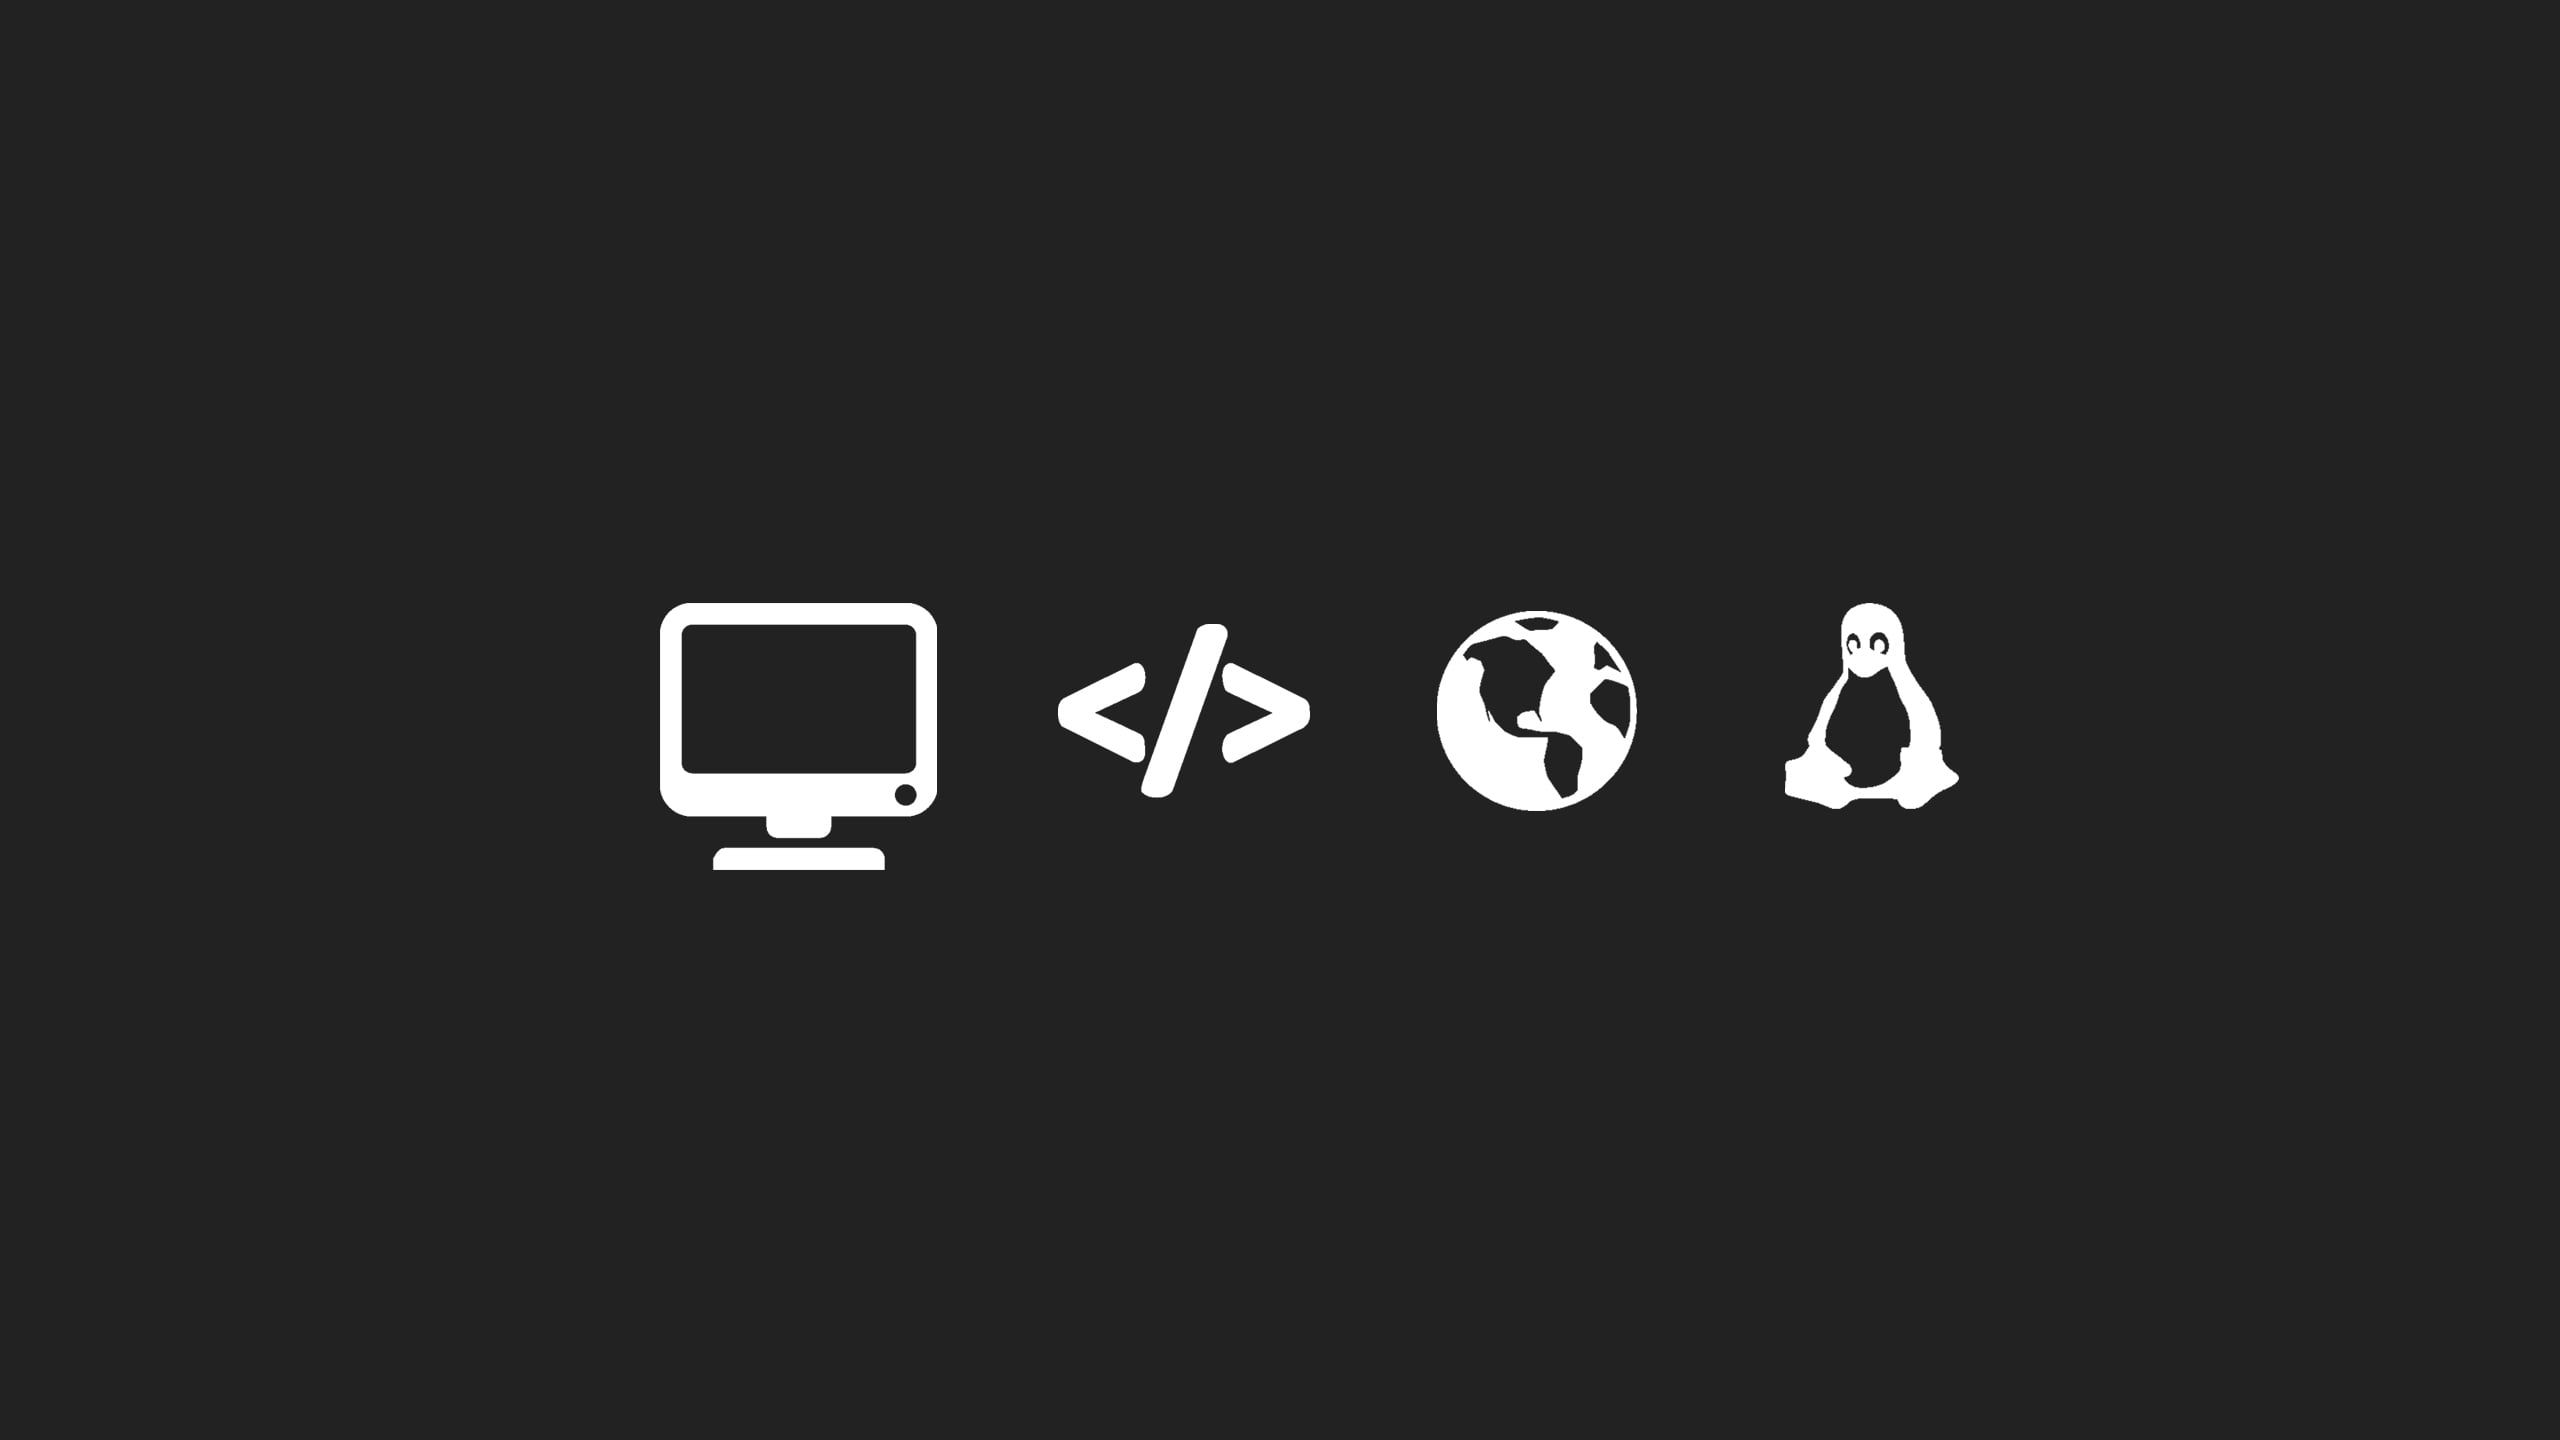 white computer monitor, earth, and penguin clip art #computer #Minimalism #code #linux #monitor #Internet #Linux #code K #w. Linux, Coding, Technology wallpaper